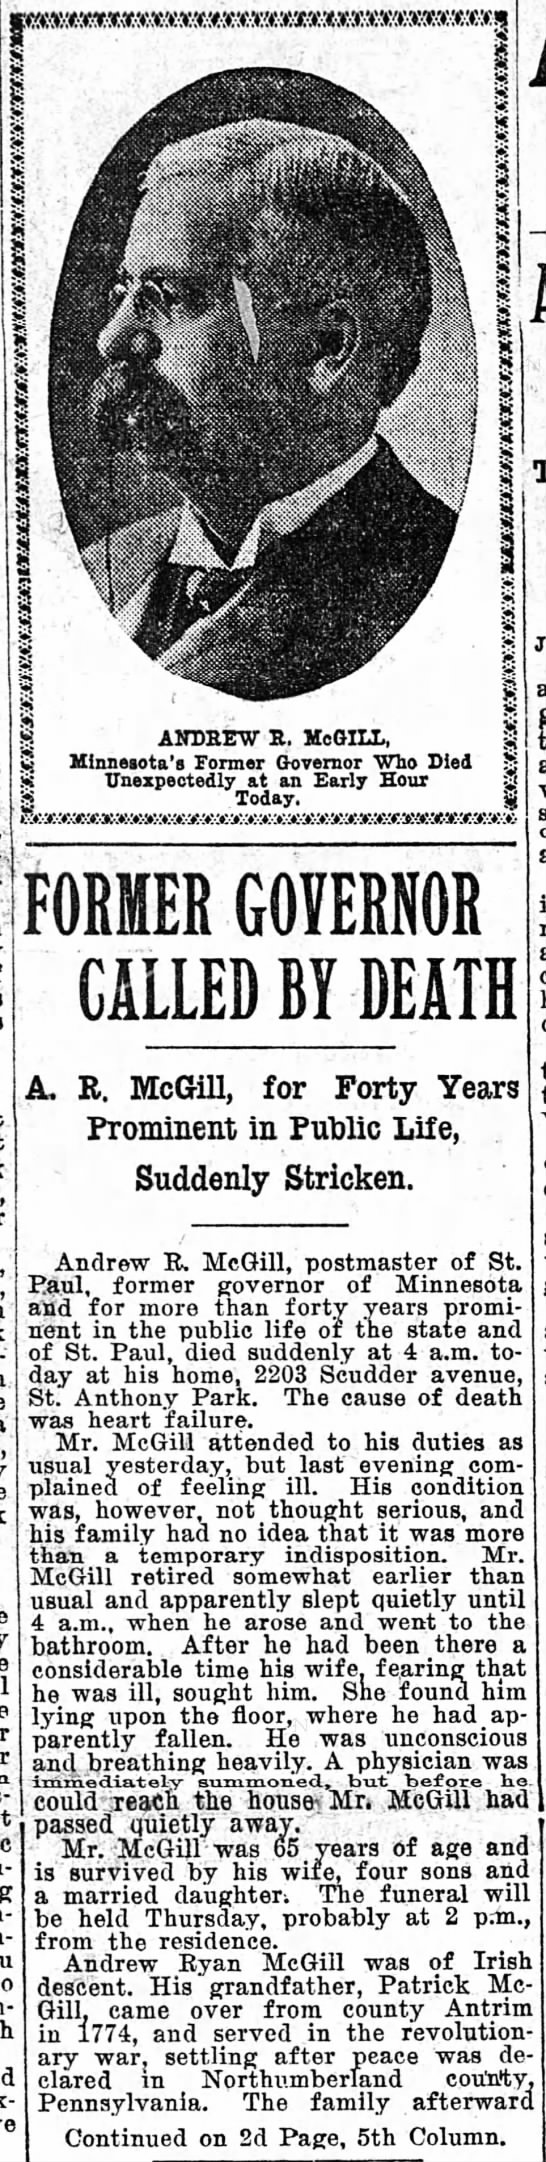 Former Governor Called by Death (part 1) - 